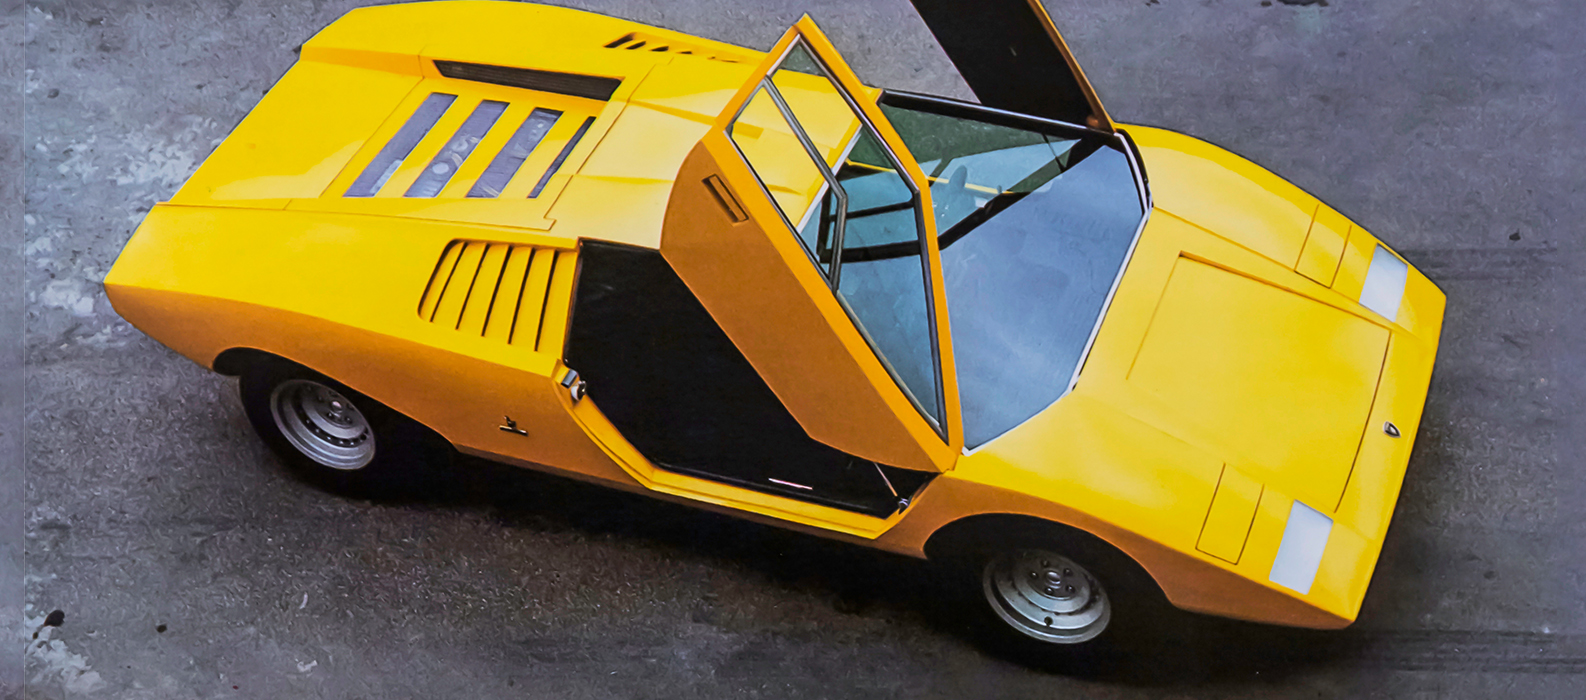 How Lamborghini Completely Half Assed The Lights On Its Most Legendary Supercar - 49